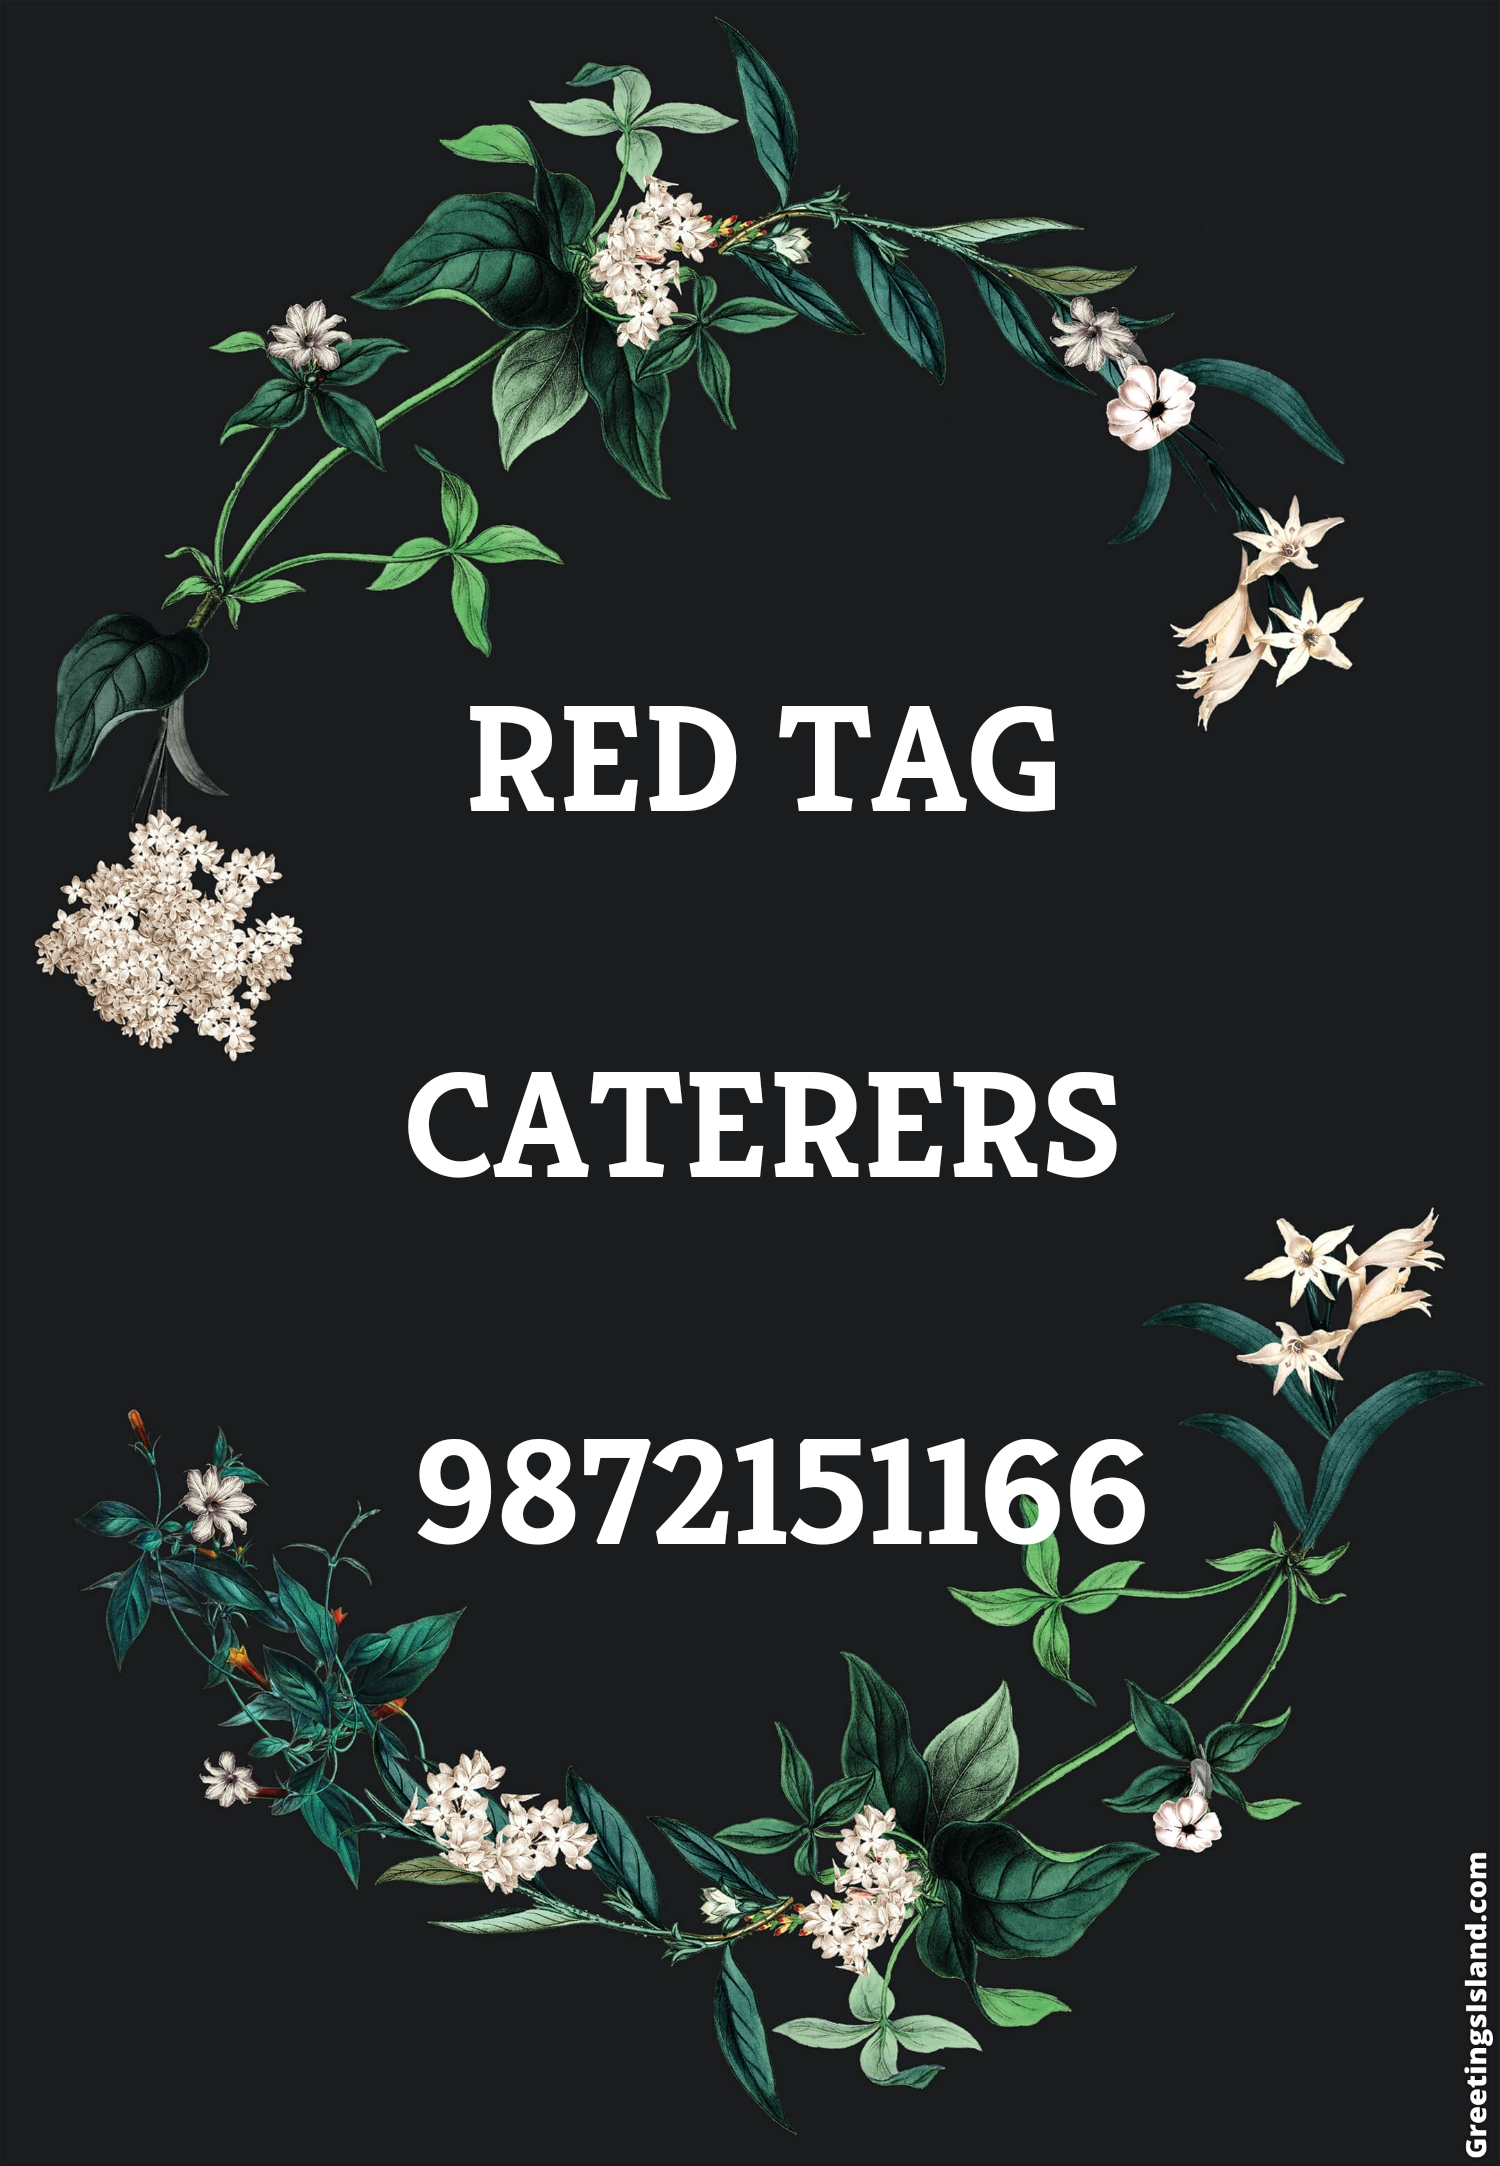 Experienced caterers in Mohali Punjab  | Red Tag Caterers | Best catering service in Mohali, experienced caterers in Mohali, top caterer in Mohali, high-end corporate catering in Mohali, wedding catering services in Mohali  - GL75956